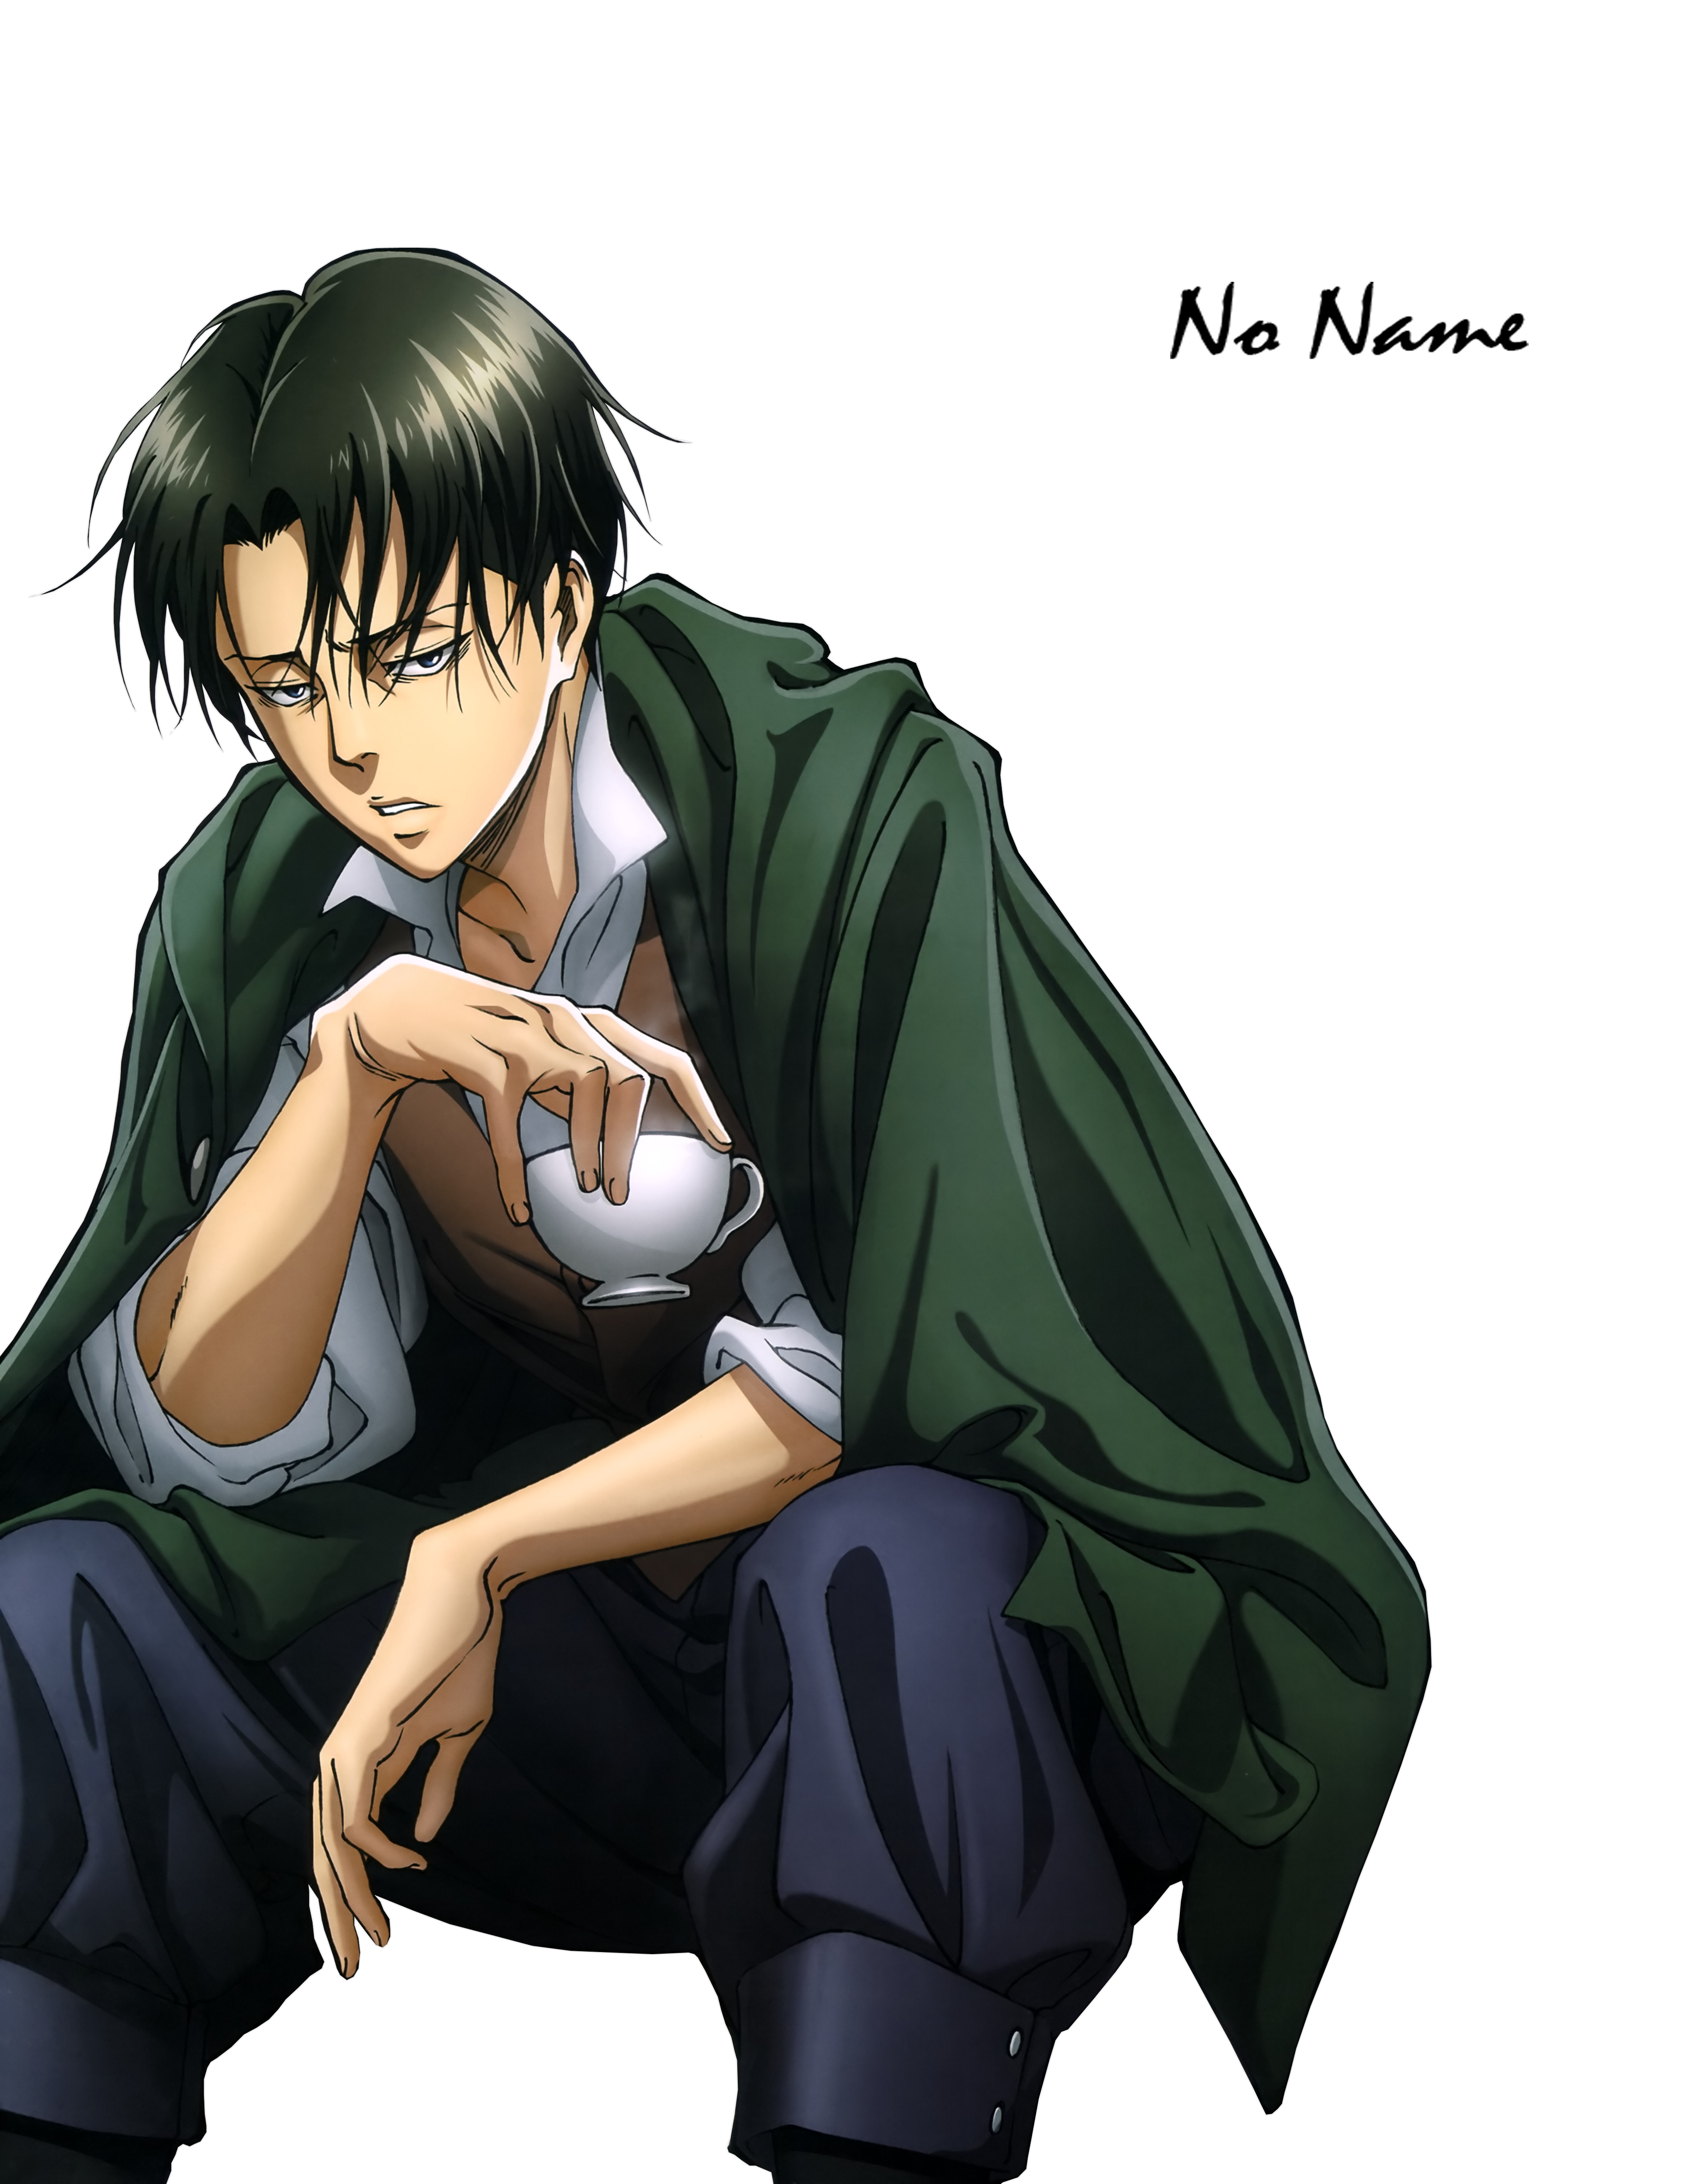 Levi Rivaille Render by NoName1999 on DeviantArt